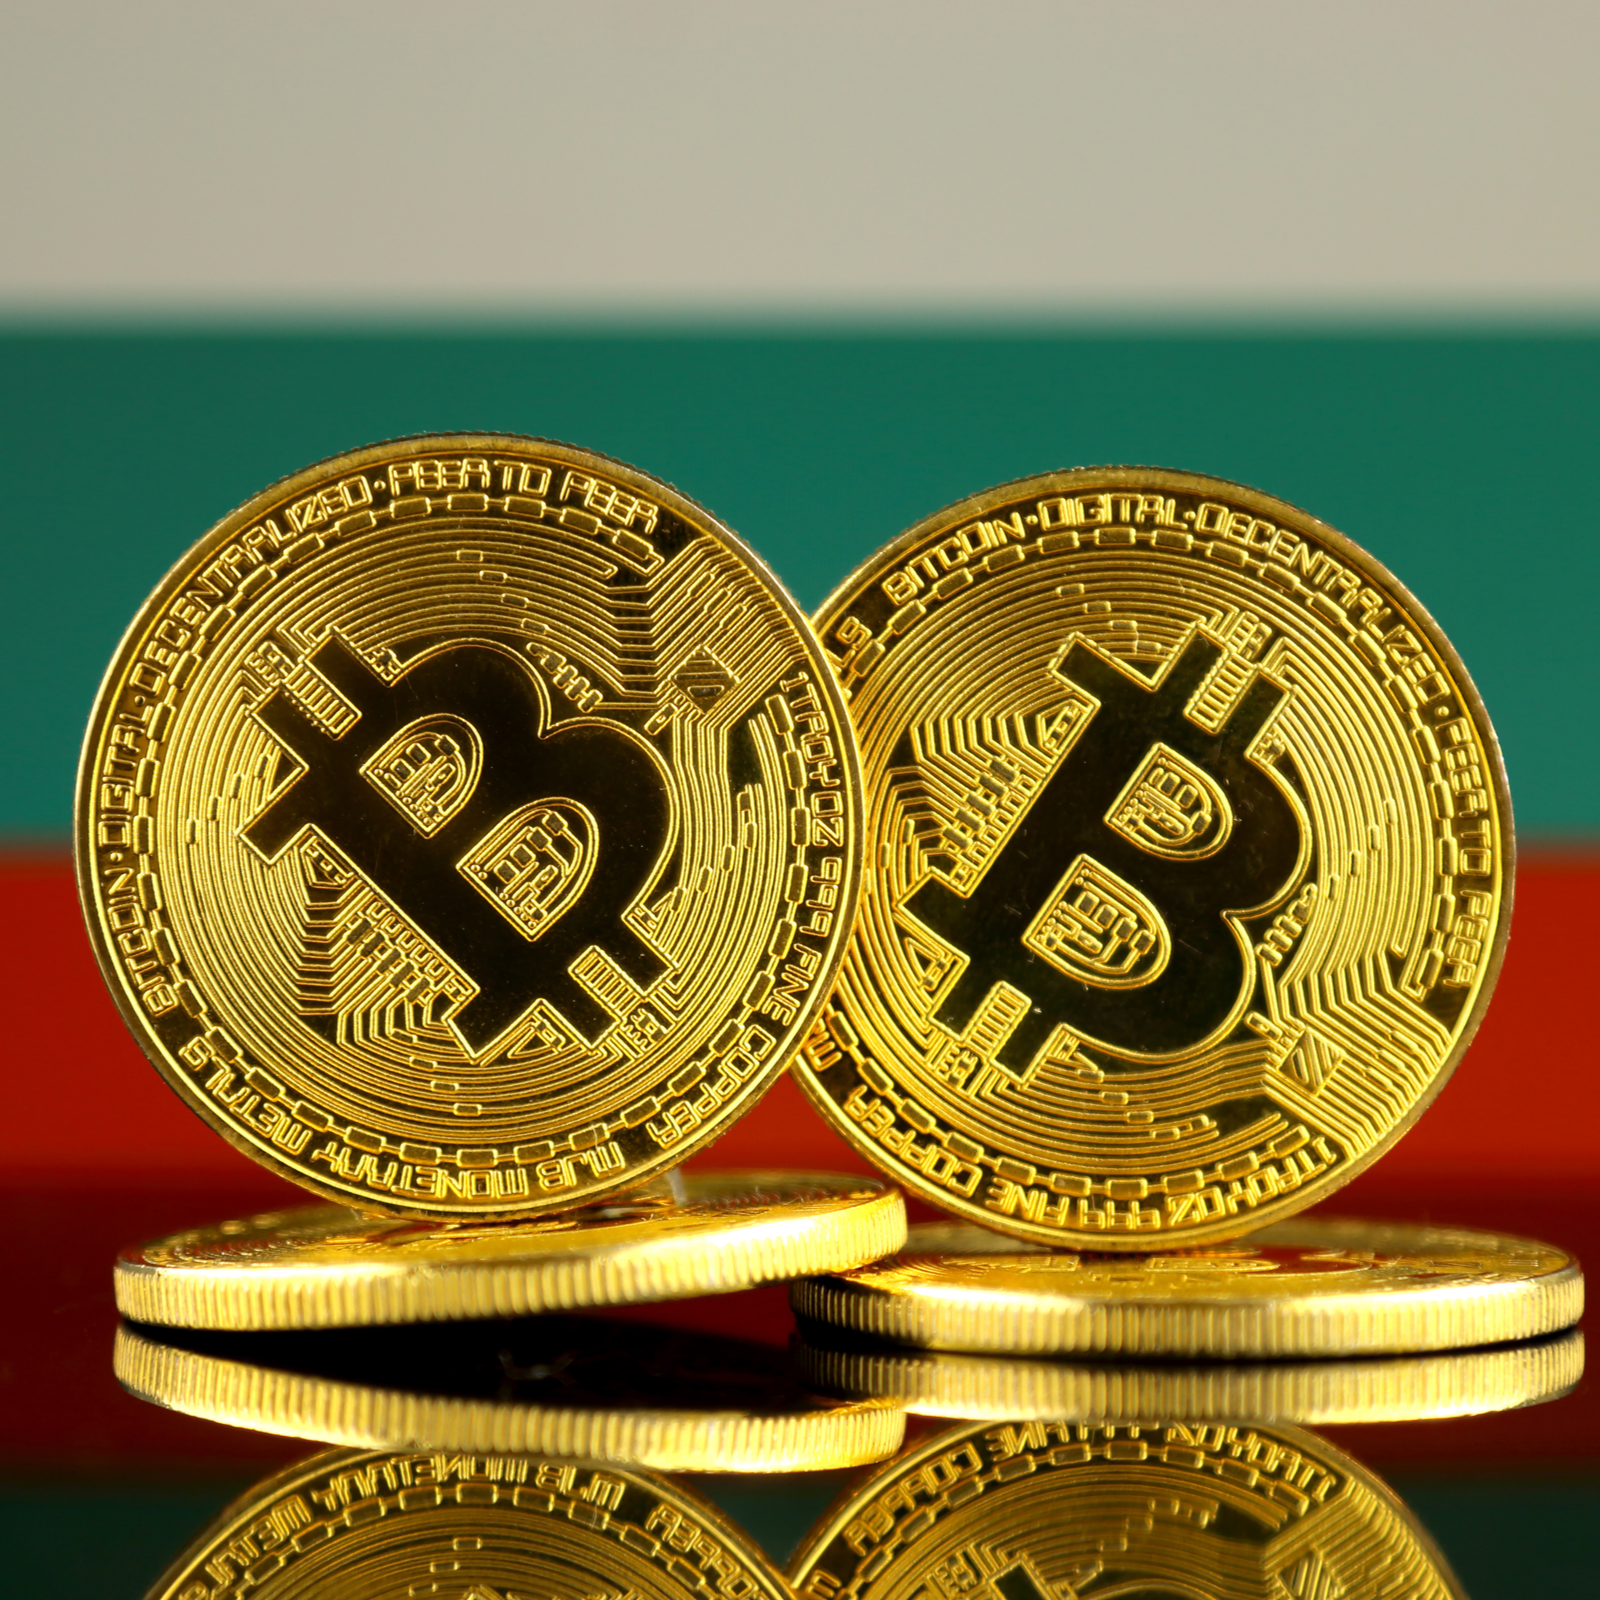 Bulgarian Official Denies Country Possessing $3.2 Billion in Bitcoin